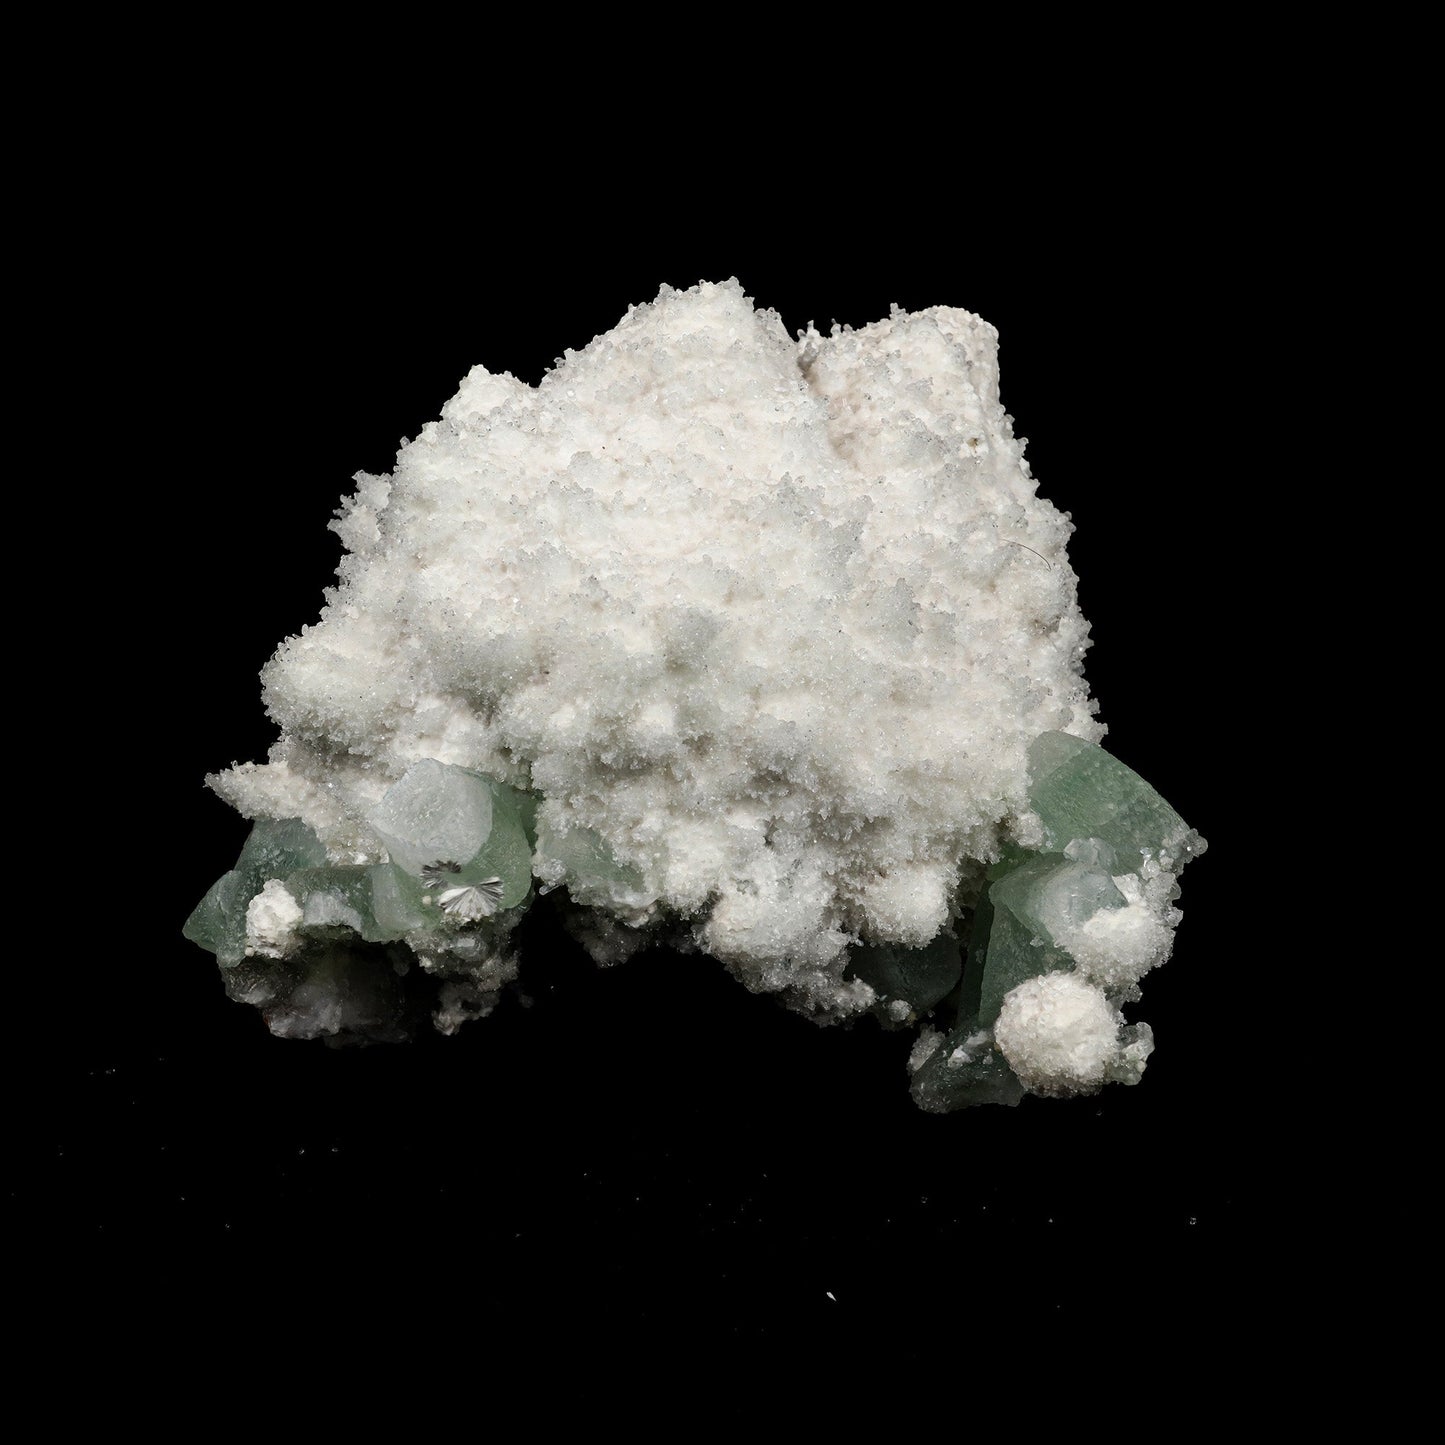 Mordenite with Green Apophyllite Natural Mineral Specimen # B 5282  https://www.superbminerals.us/products/mordenite-with-green-apophyllite-natural-mineral-specimen-b-5282  Features: The specimen features a grouping of spiky white mordenite crystals almost&nbsp; coming off a matrix of gemmy blocky green apophyllite crystals. This specimen displays excellent crystallization throughout. Primary Mineral(s): Mordenite Secondary Mineral(s): Green ApophylliteMatrix: N/A 5 Inch x 5